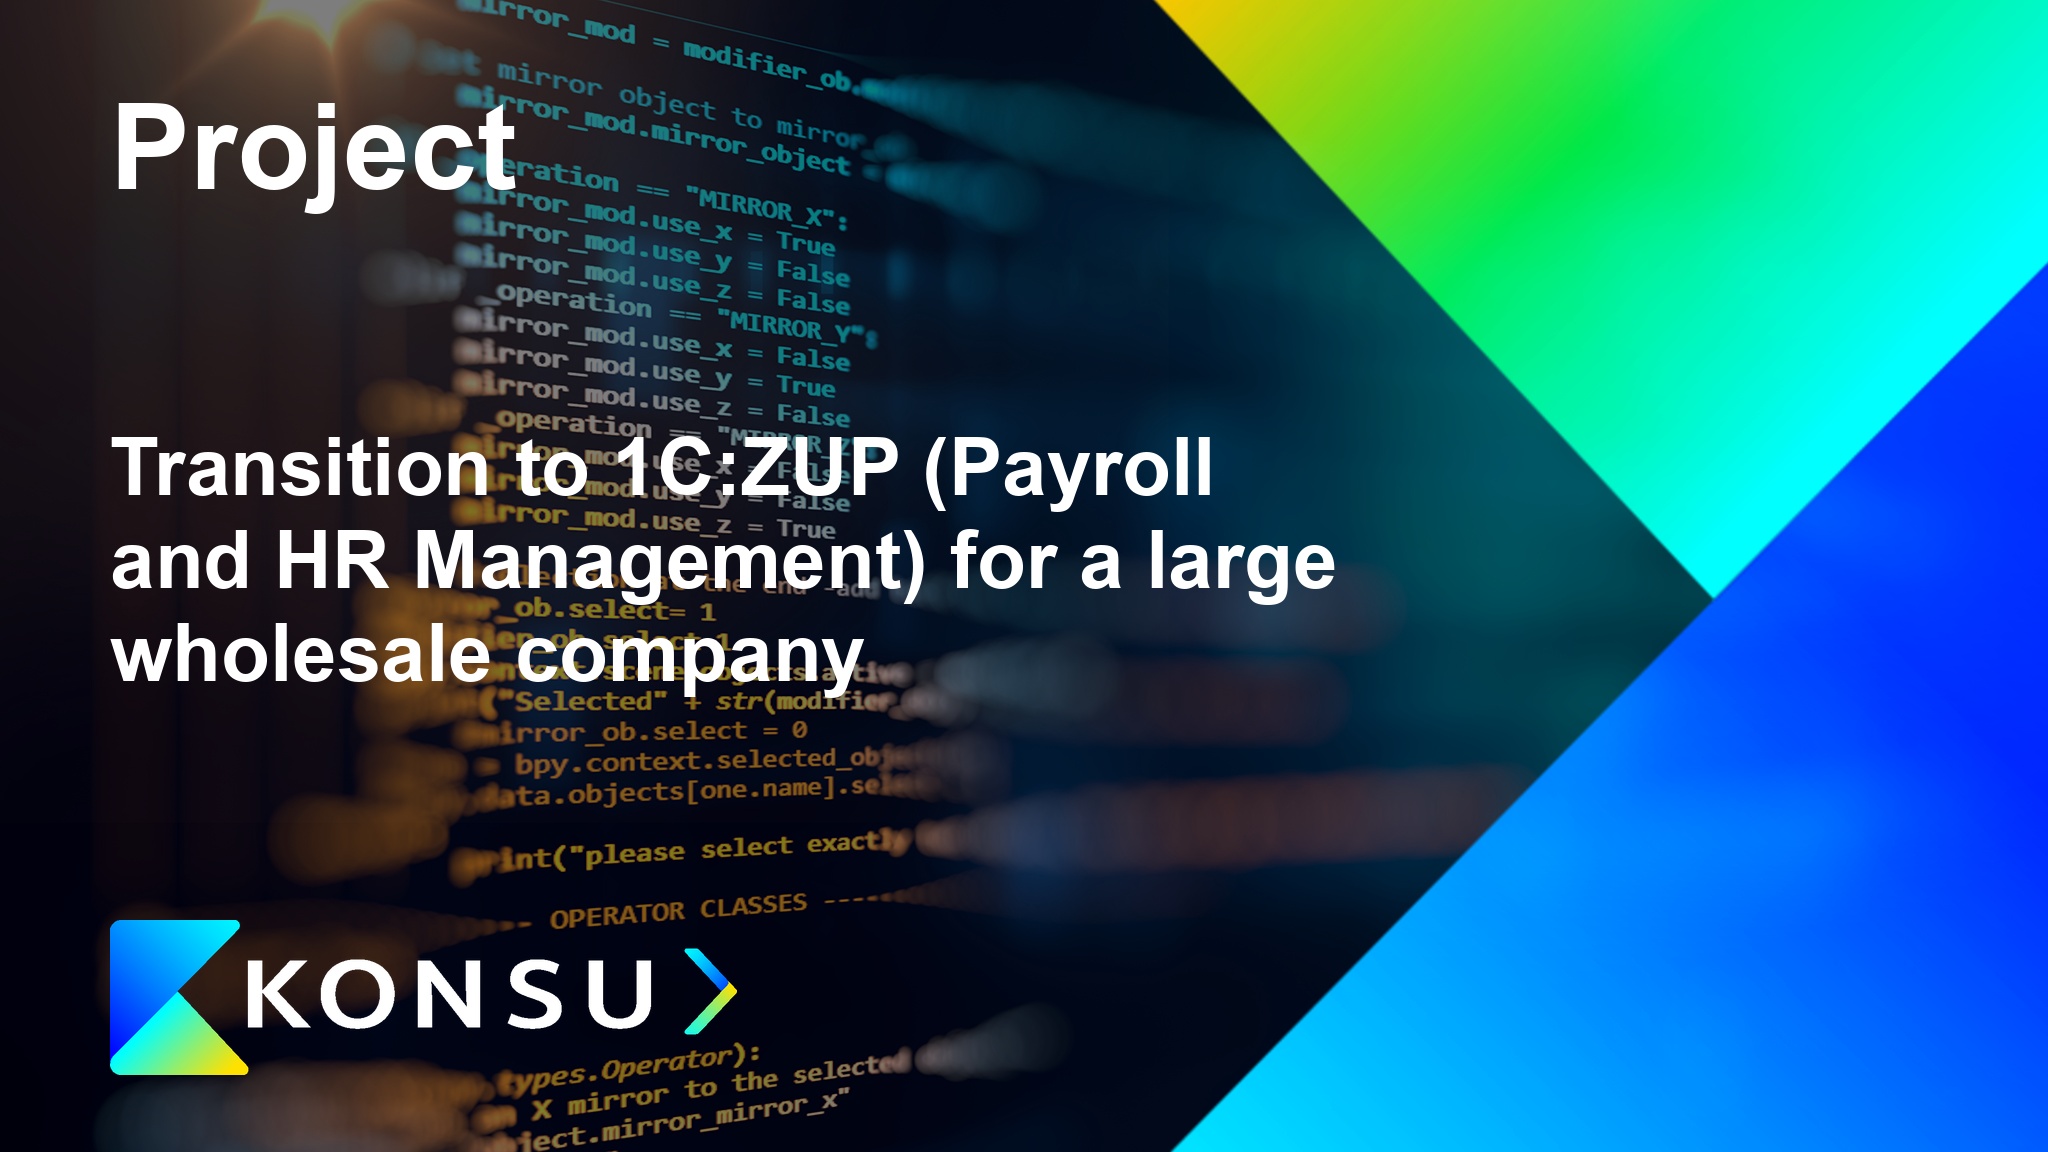 Transition 1czup payroll and management for large en konsu outso